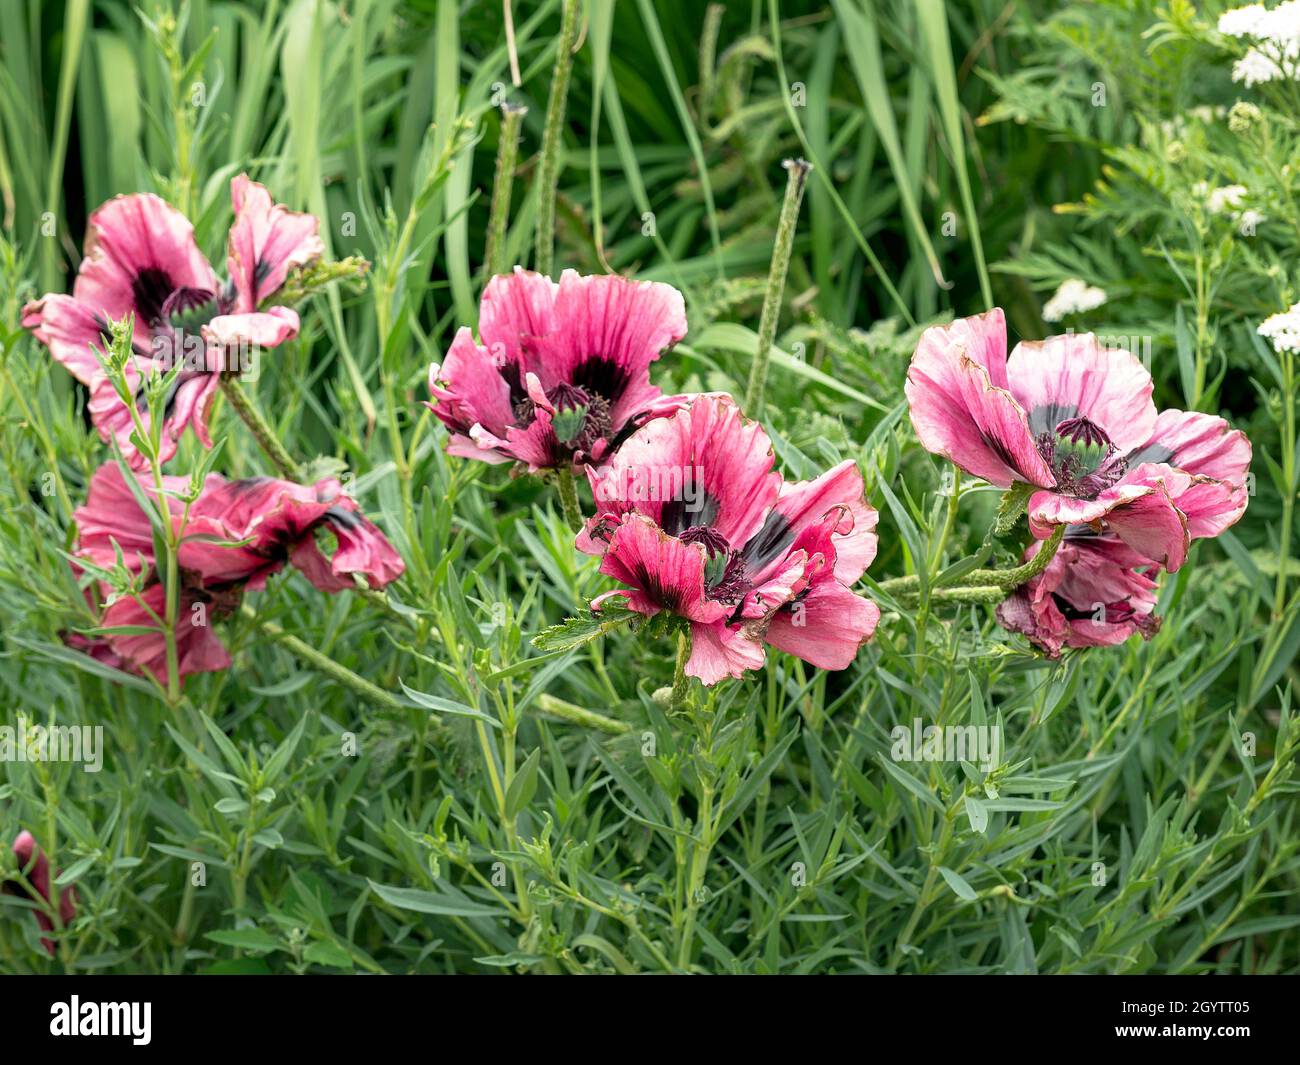 Large pink poppy flowers wilting in a summer garden Stock Photo